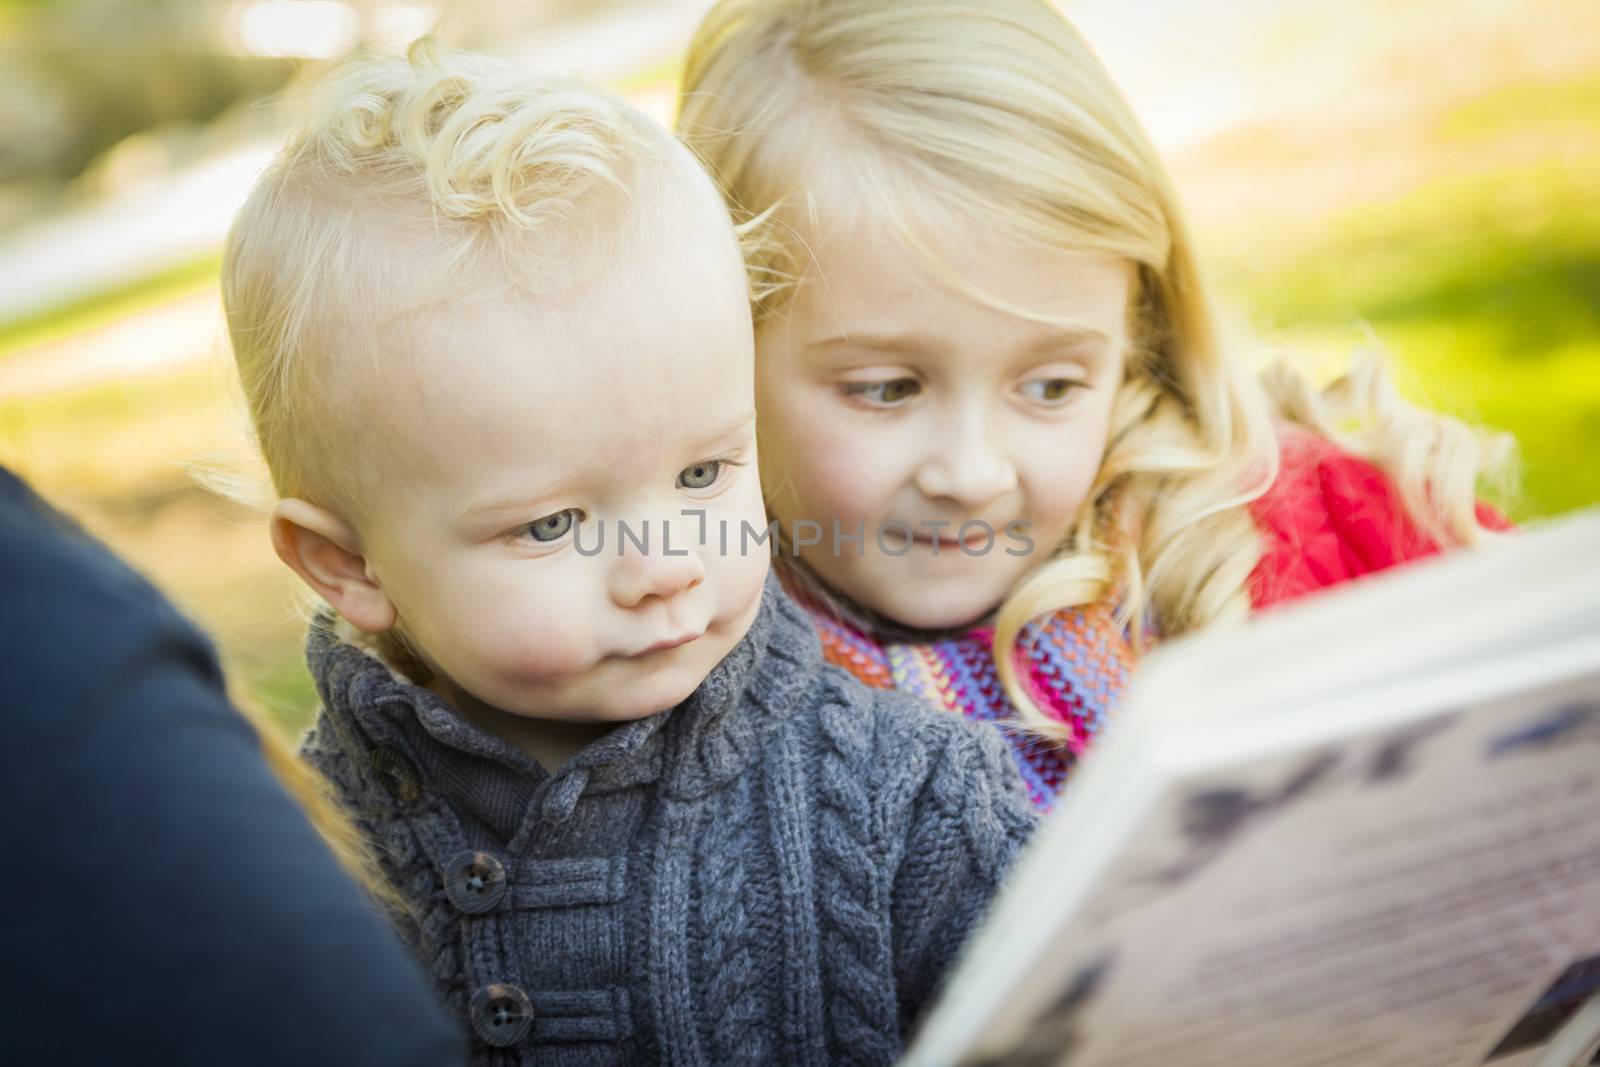 Mother Reading a Book to Her Two Adorable Blonde Children Wearing Winter Coats Outdoors.
